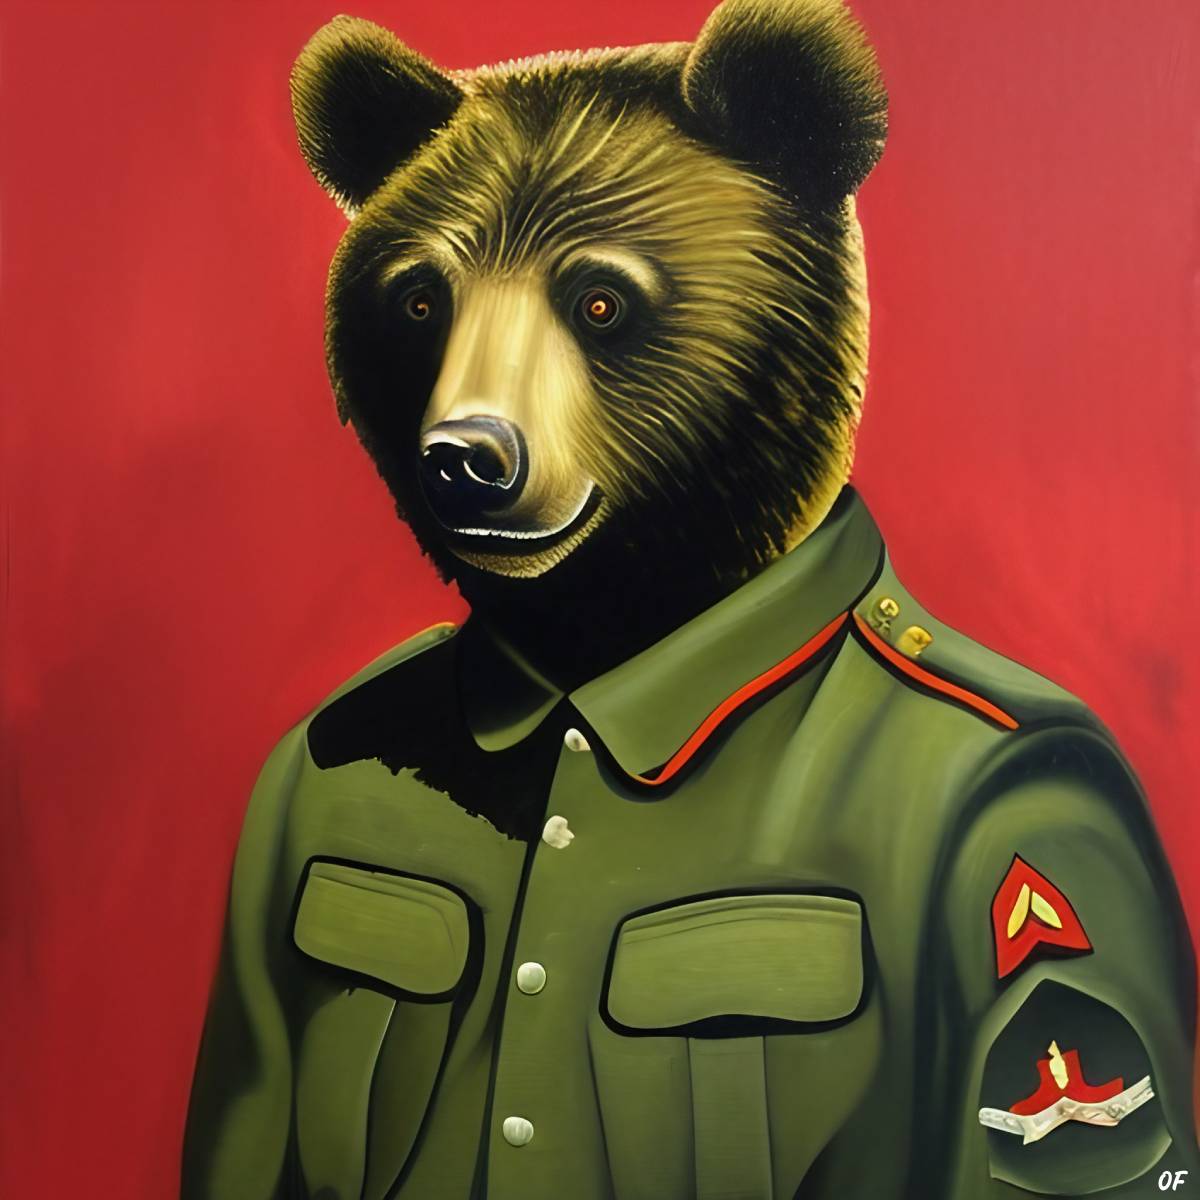 A painting of a bear in a military uniform.